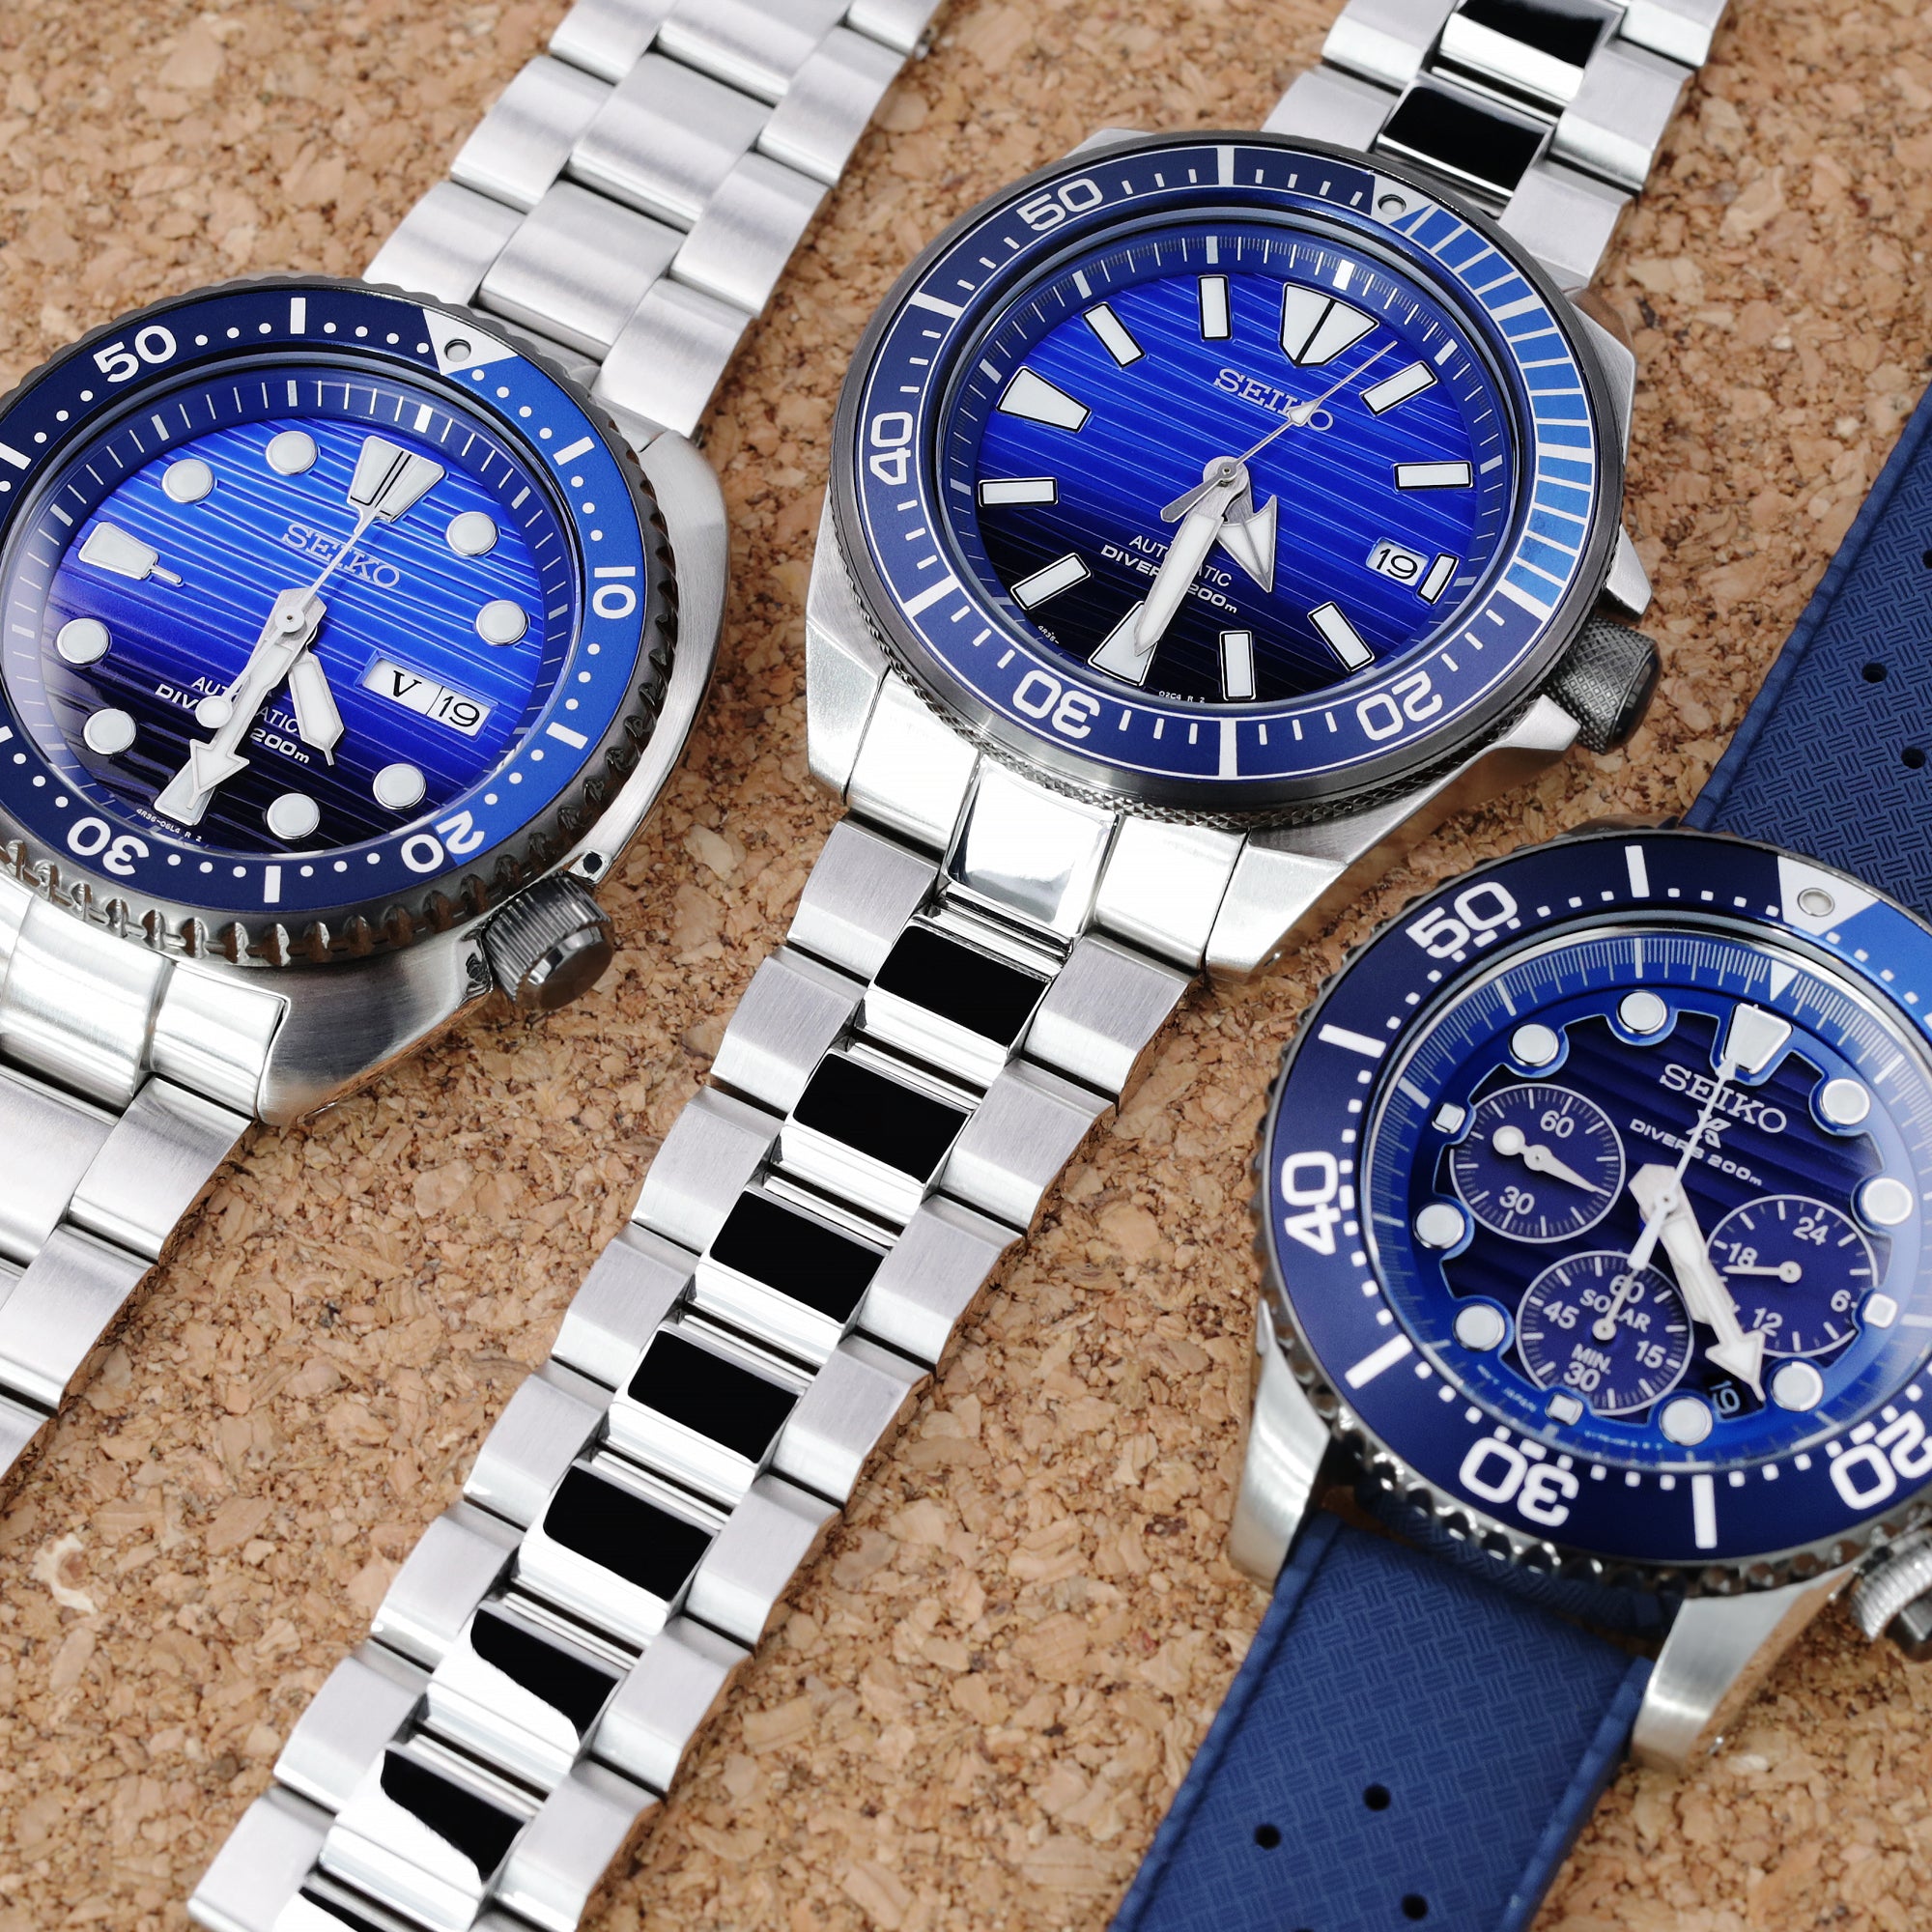 The Past & Present Seiko 'SAVE The Ocean' Watches | Strapcode